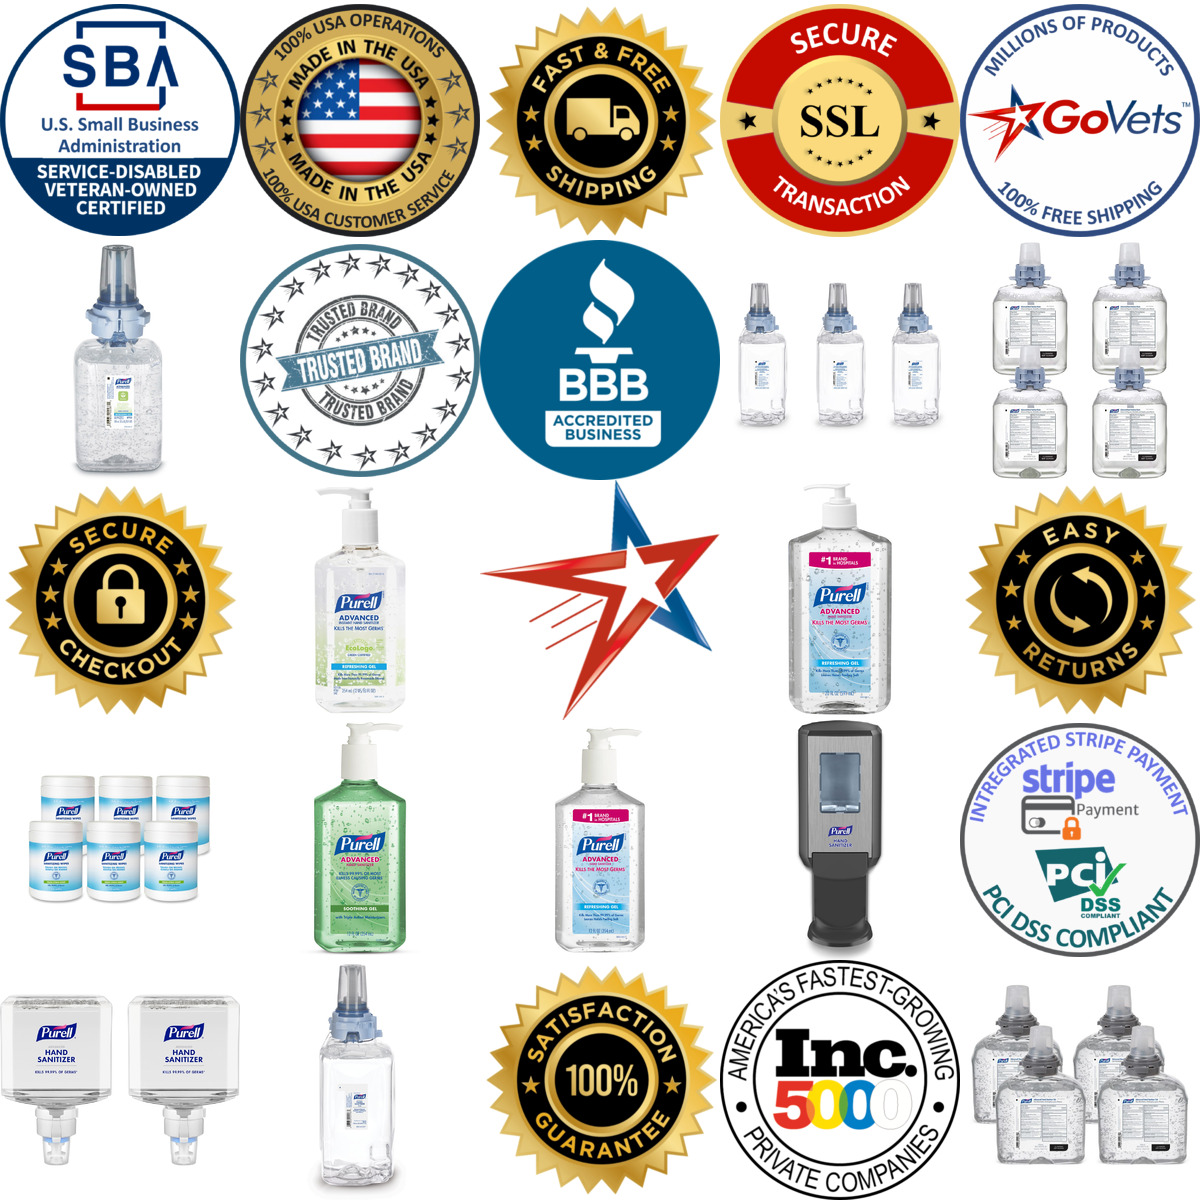 A selection of Purell products on GoVets